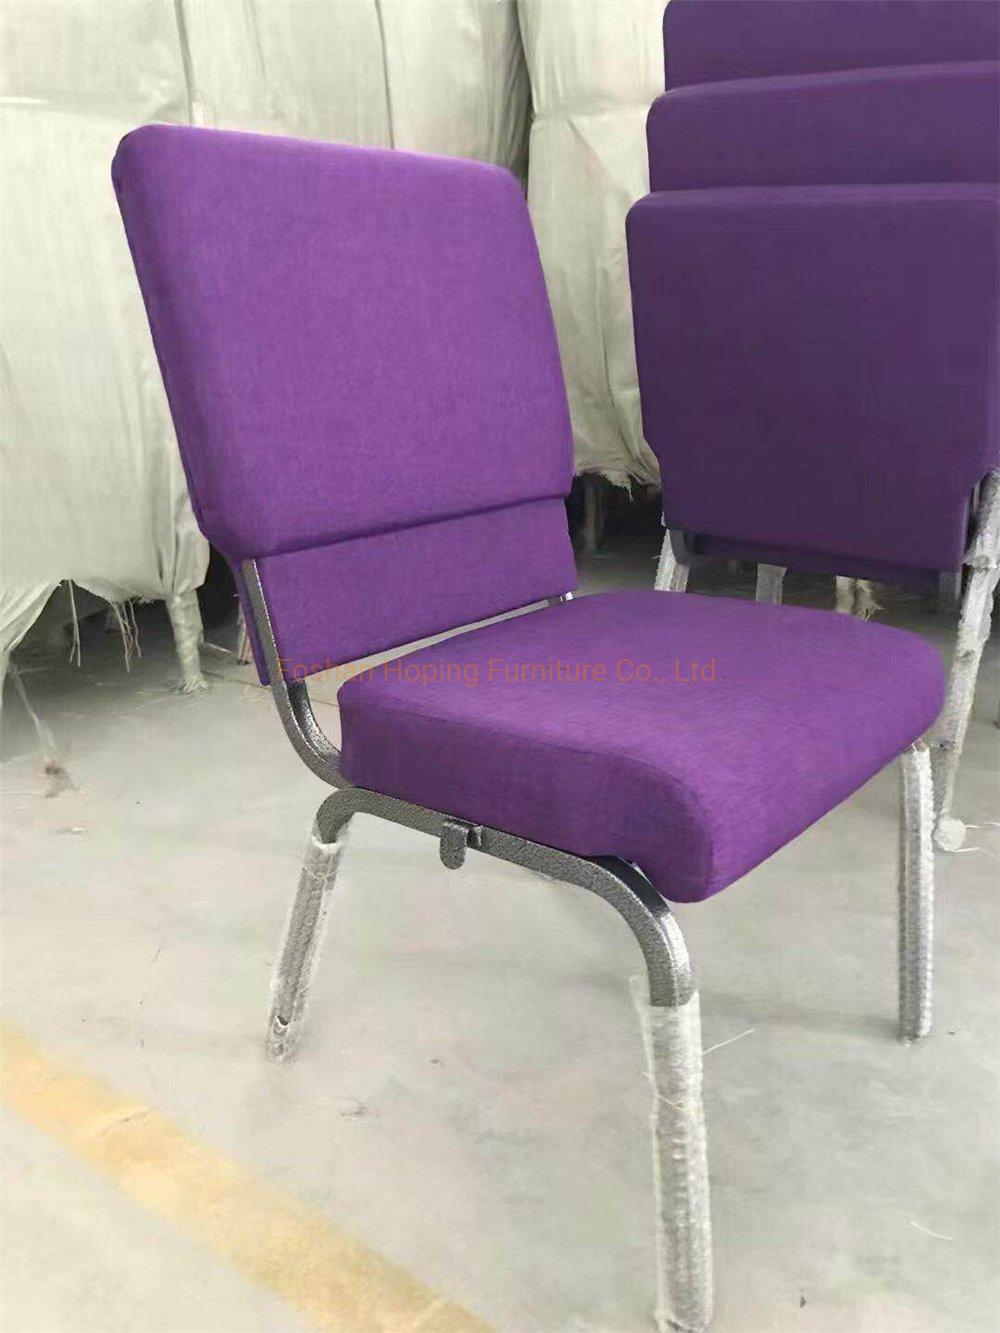 Modern Gray Textile School Lecture Hall Conference Theater Cinema Auditorium Chair Public Chairs Church Furniture